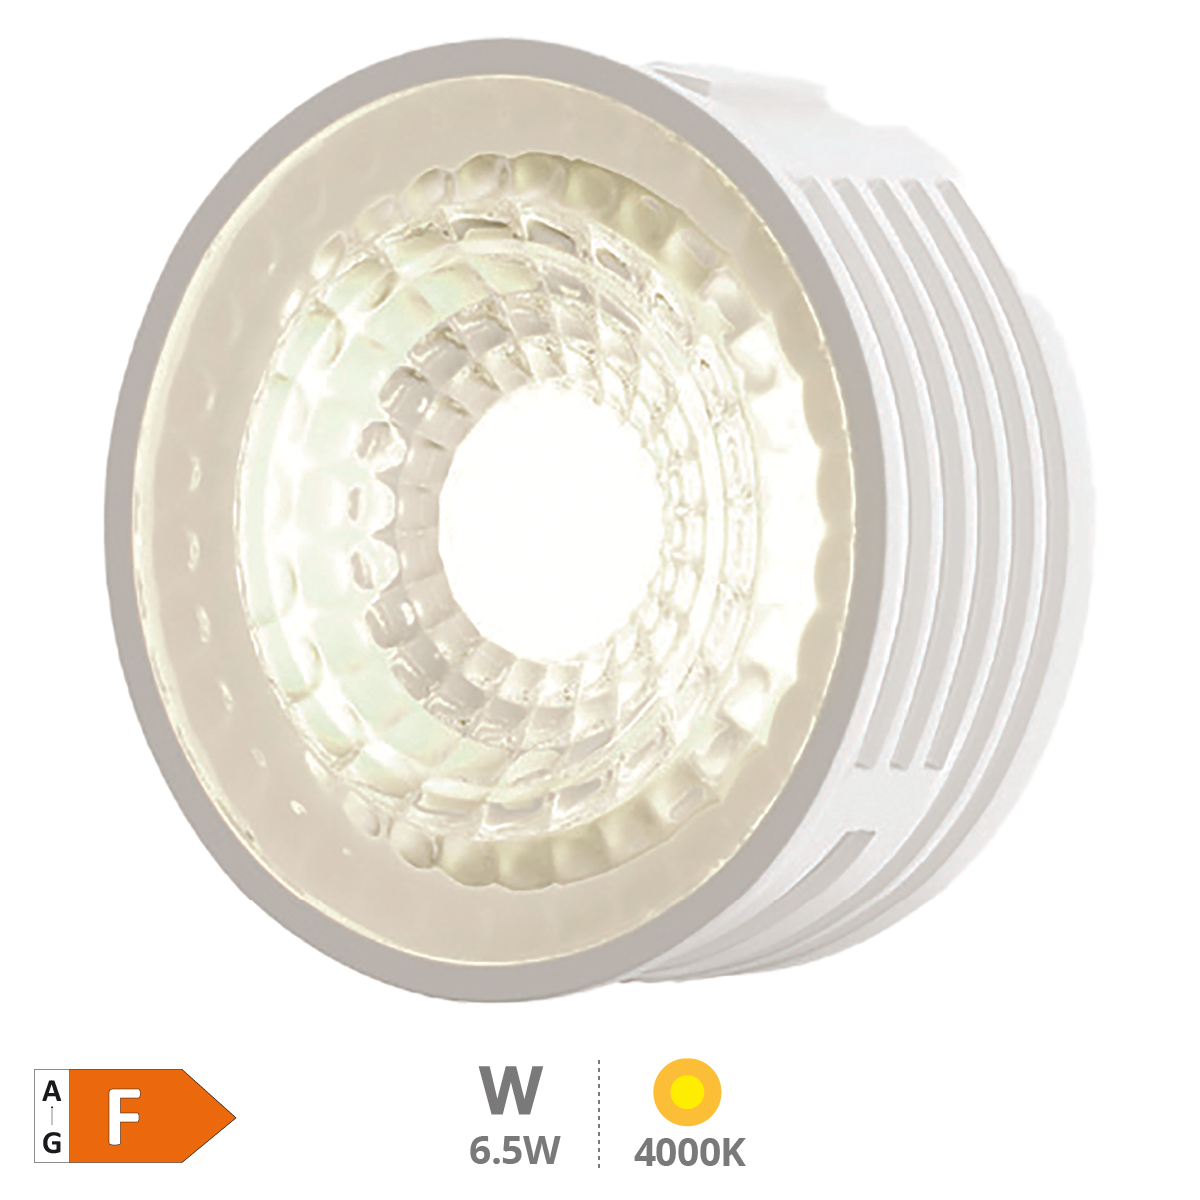 LED module for recessed lighting fixtures 6,5W 60º 4000K